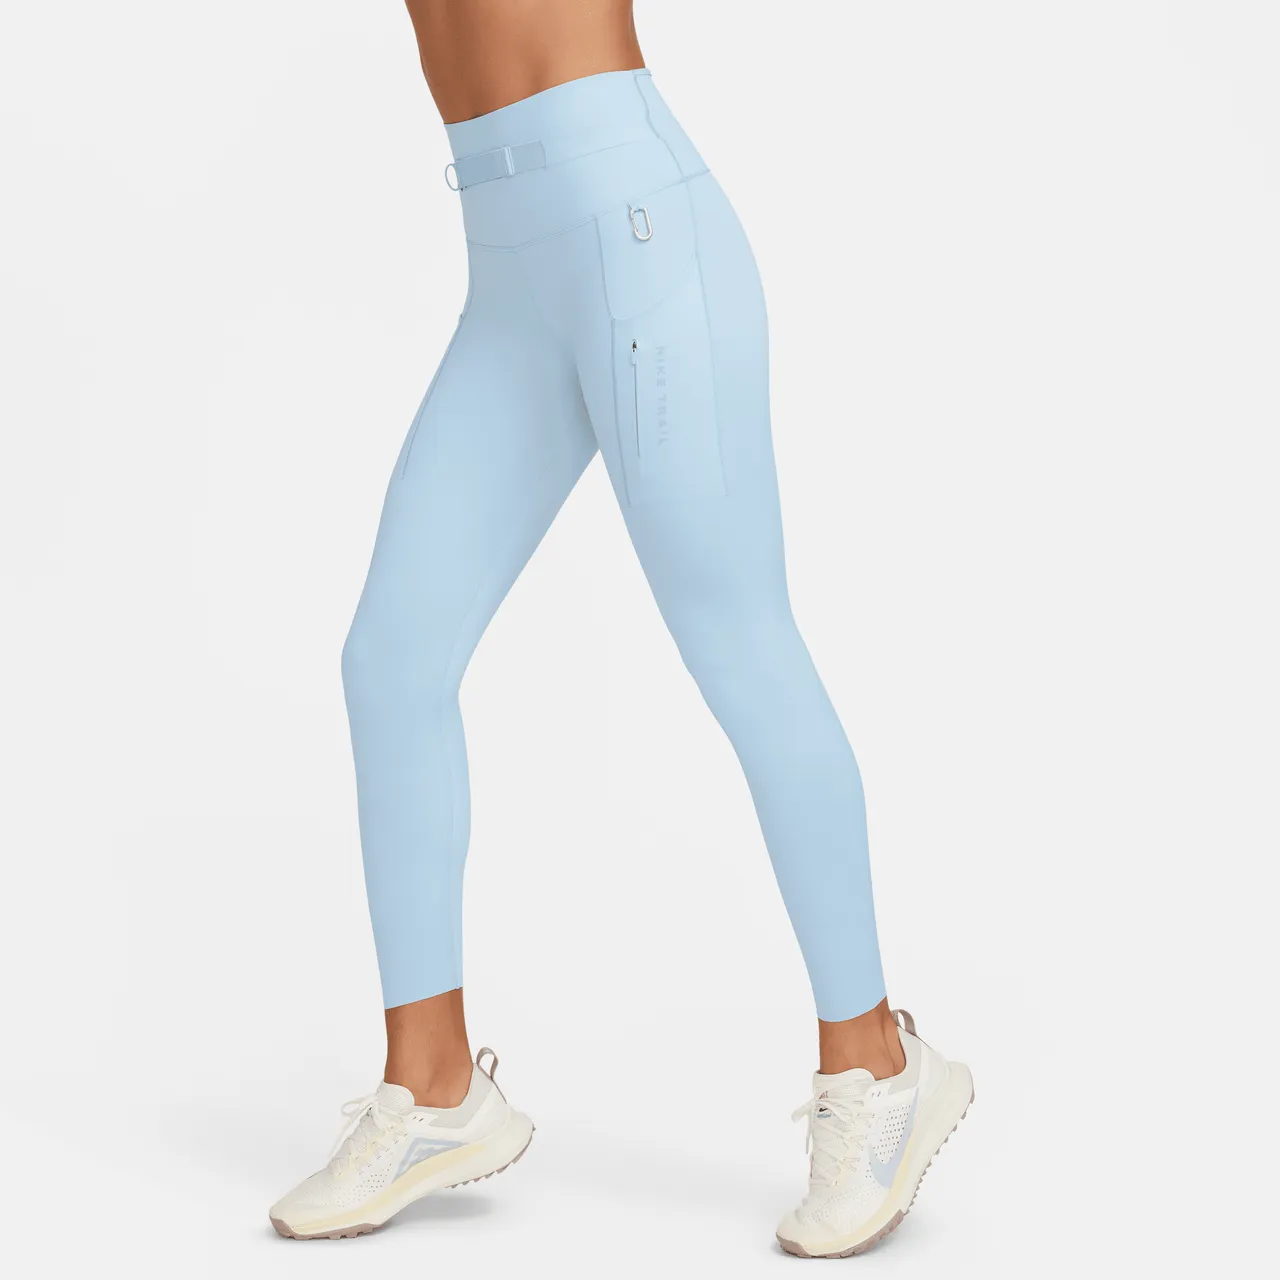 Nike Trail Go Women's Firm-Support High-Waisted 7/8 Leggings with Pockets - Blue - Nylon